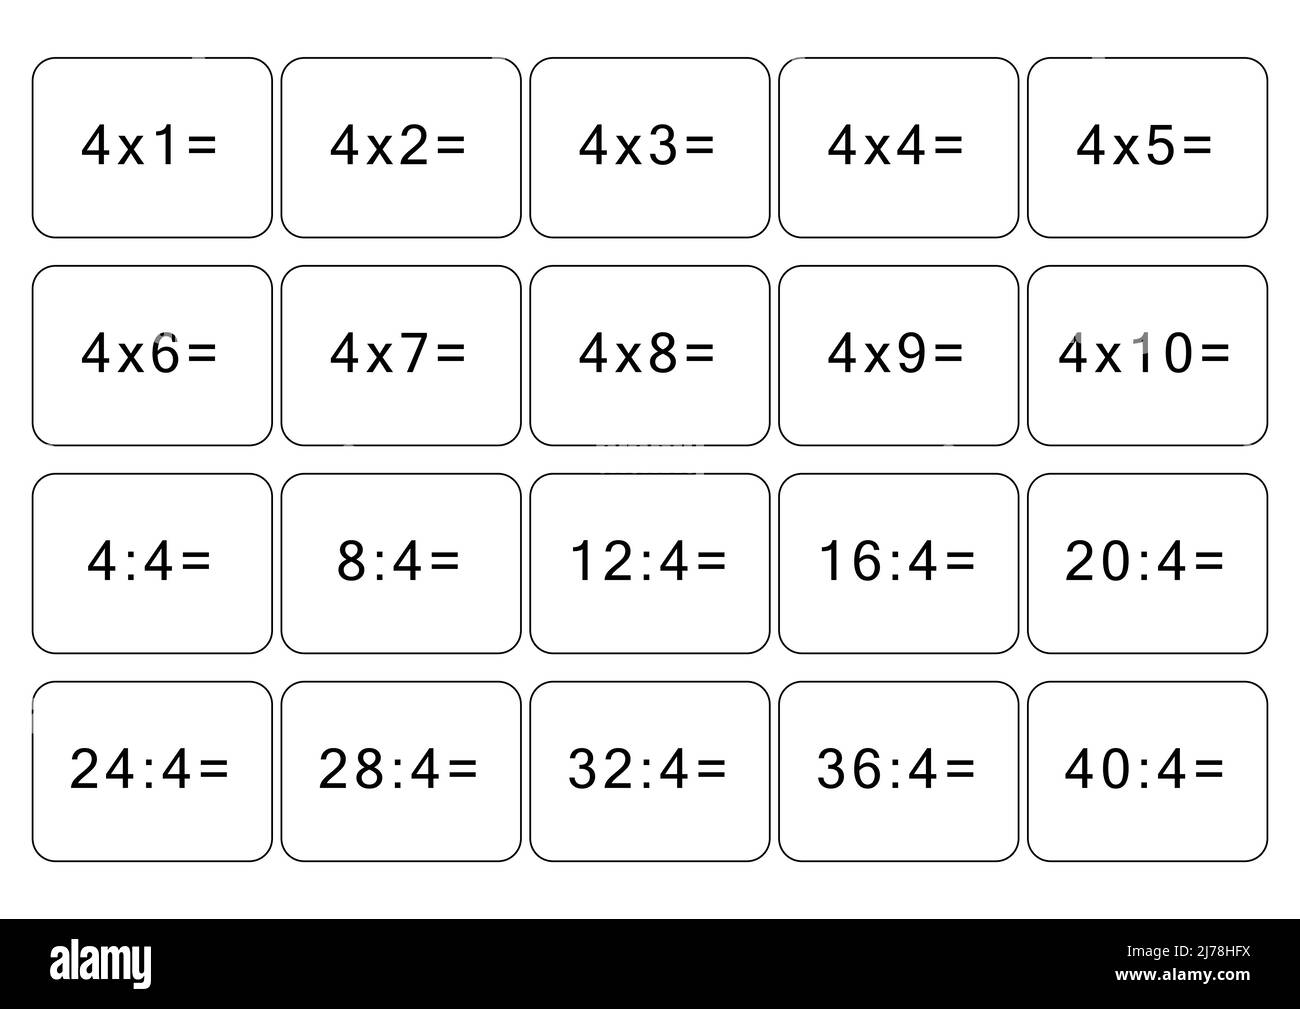 multiplication-and-division-table-of-4-maths-card-with-an-example